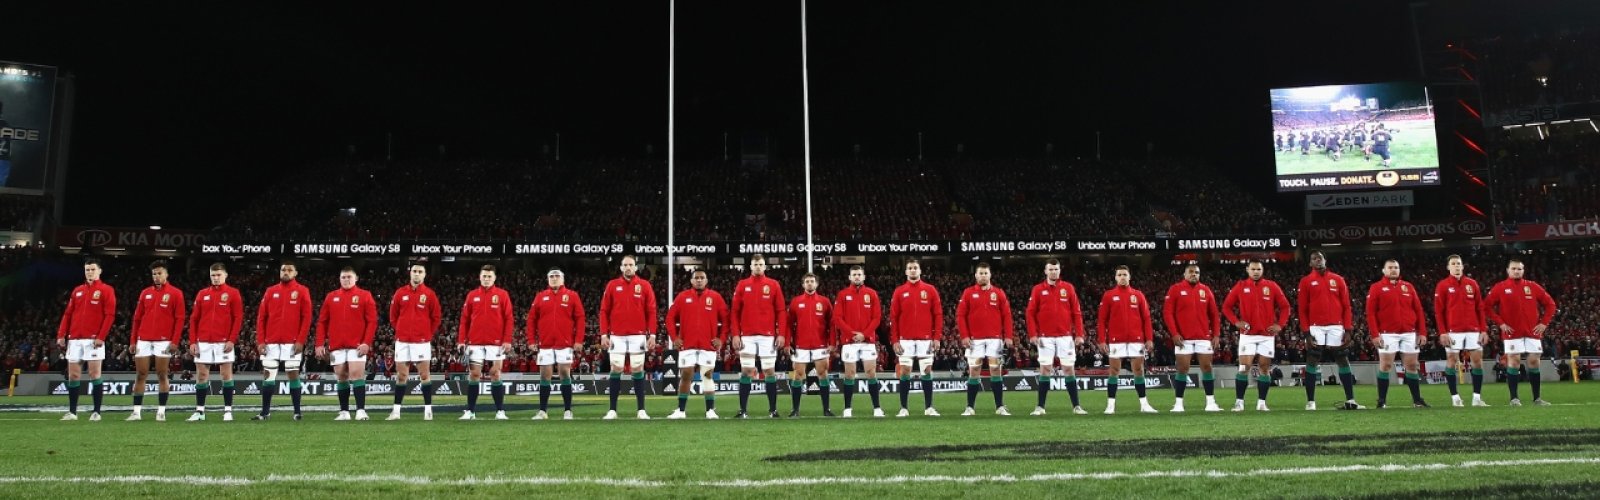 The British & Irish Lions Australia 2025 official ticket packages for all three test matches image